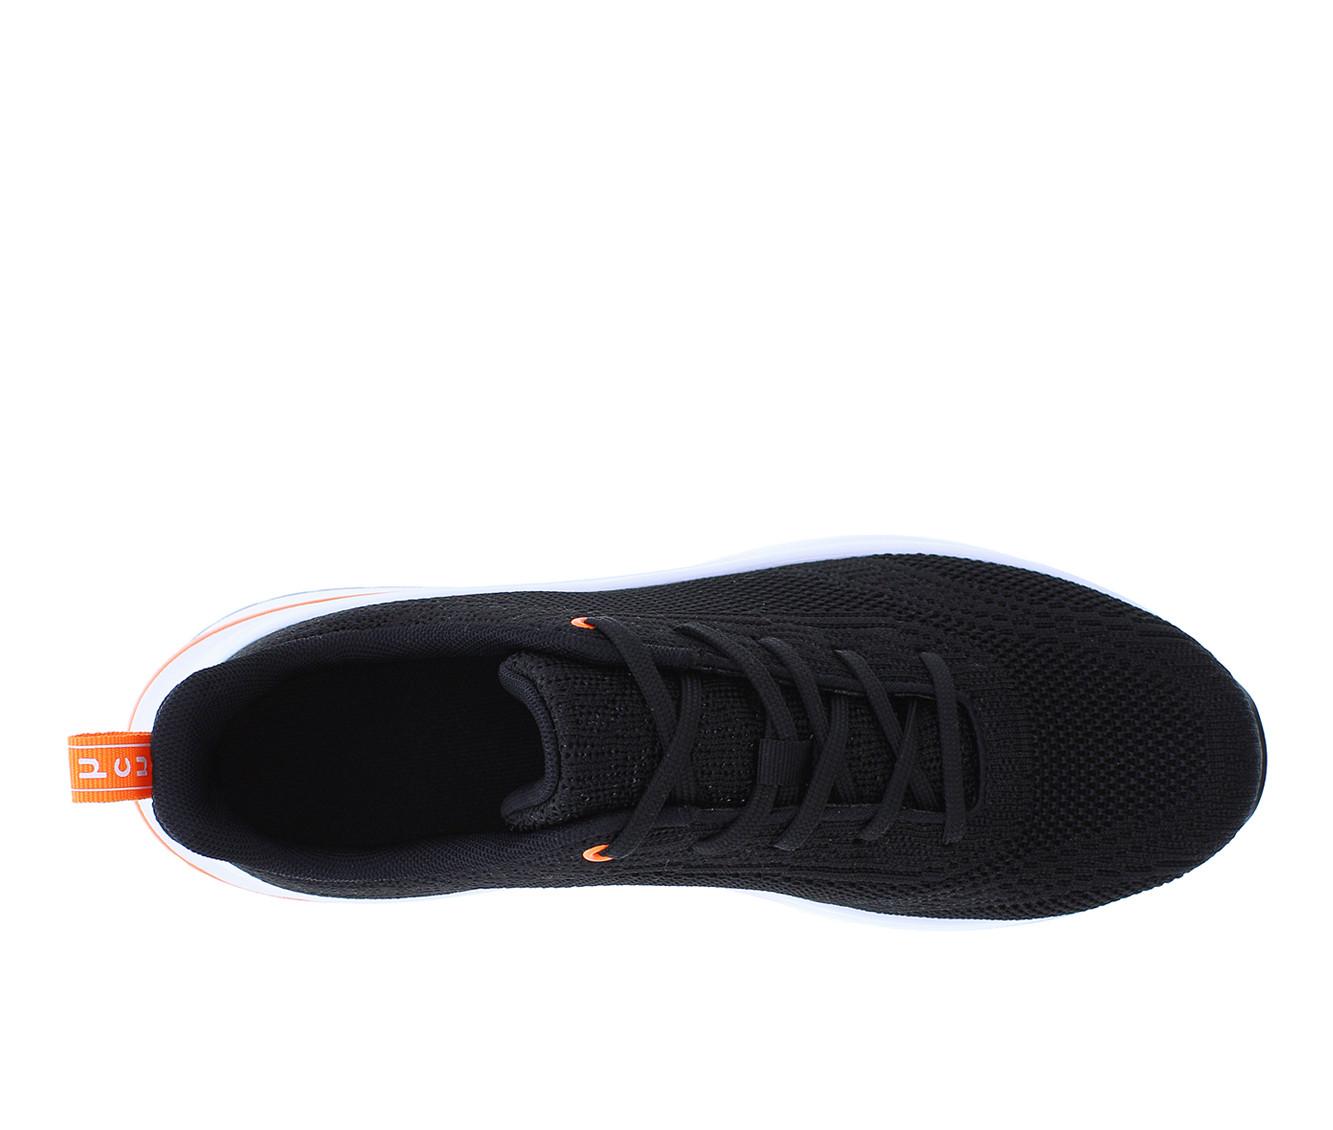 Men's French Connection Micah Sneakers